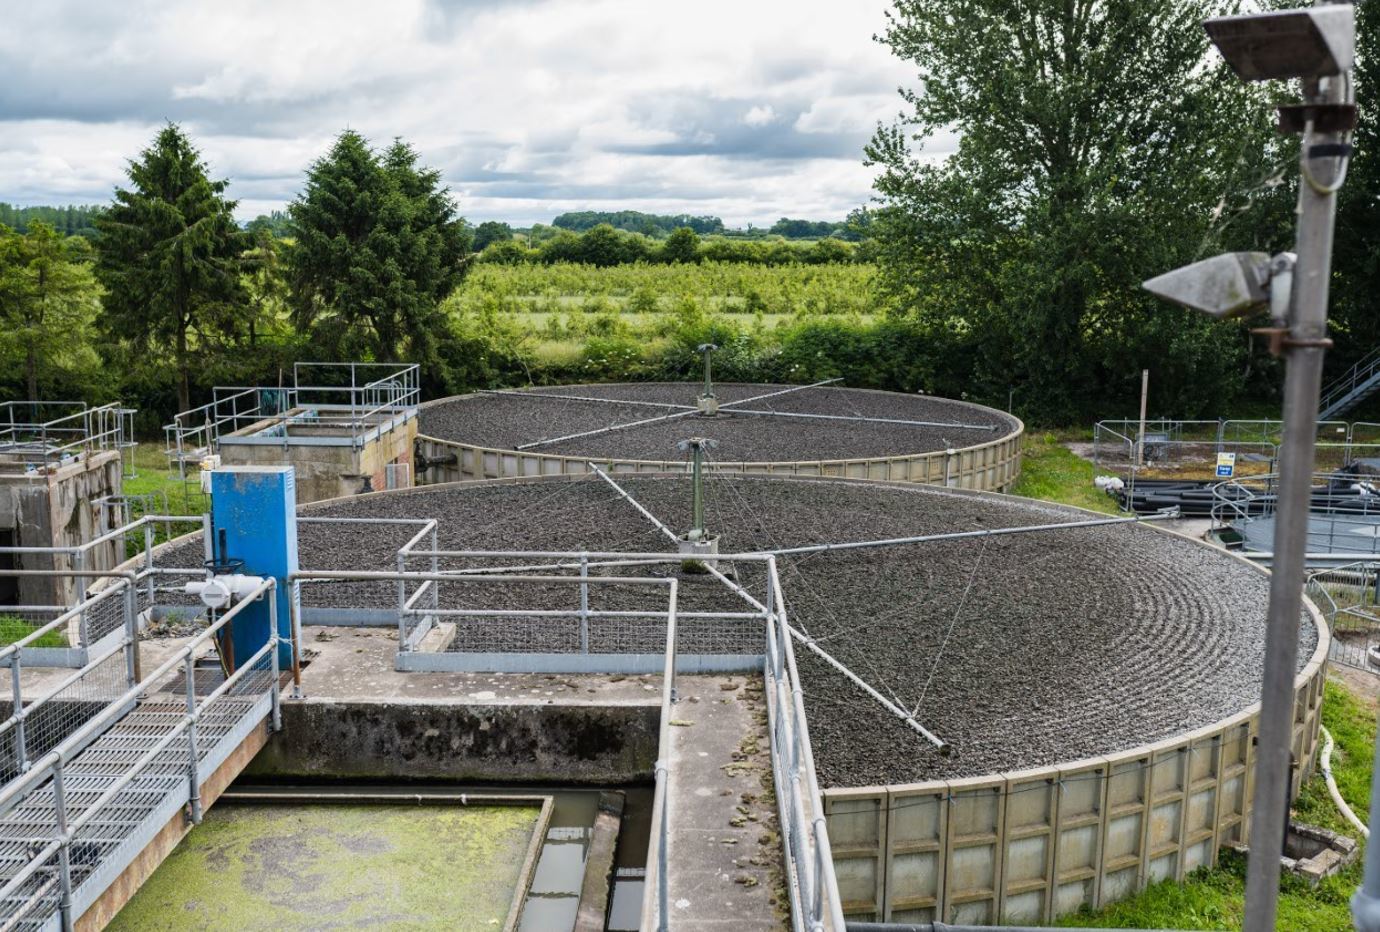 The work at the treatment works in Weobley should be completed next year, Welsh Water says